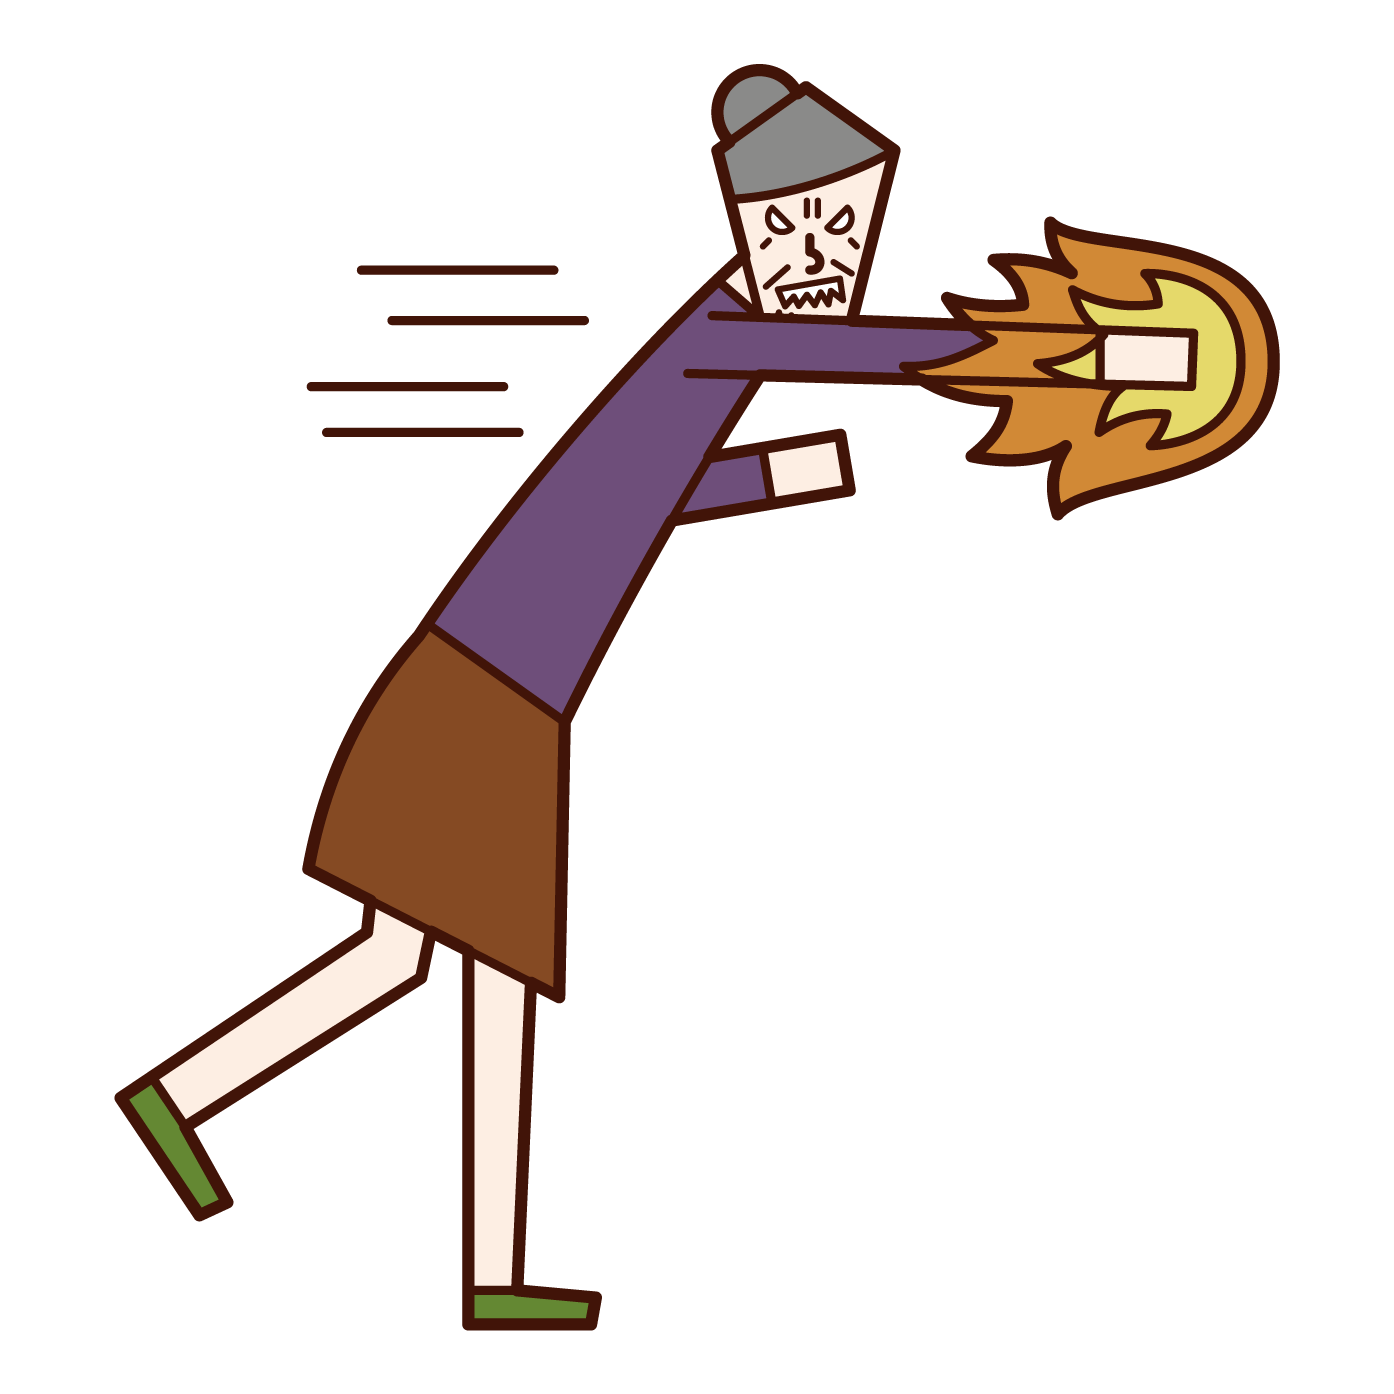 Illustration of a person (grandmother) who shoots a punch of anger